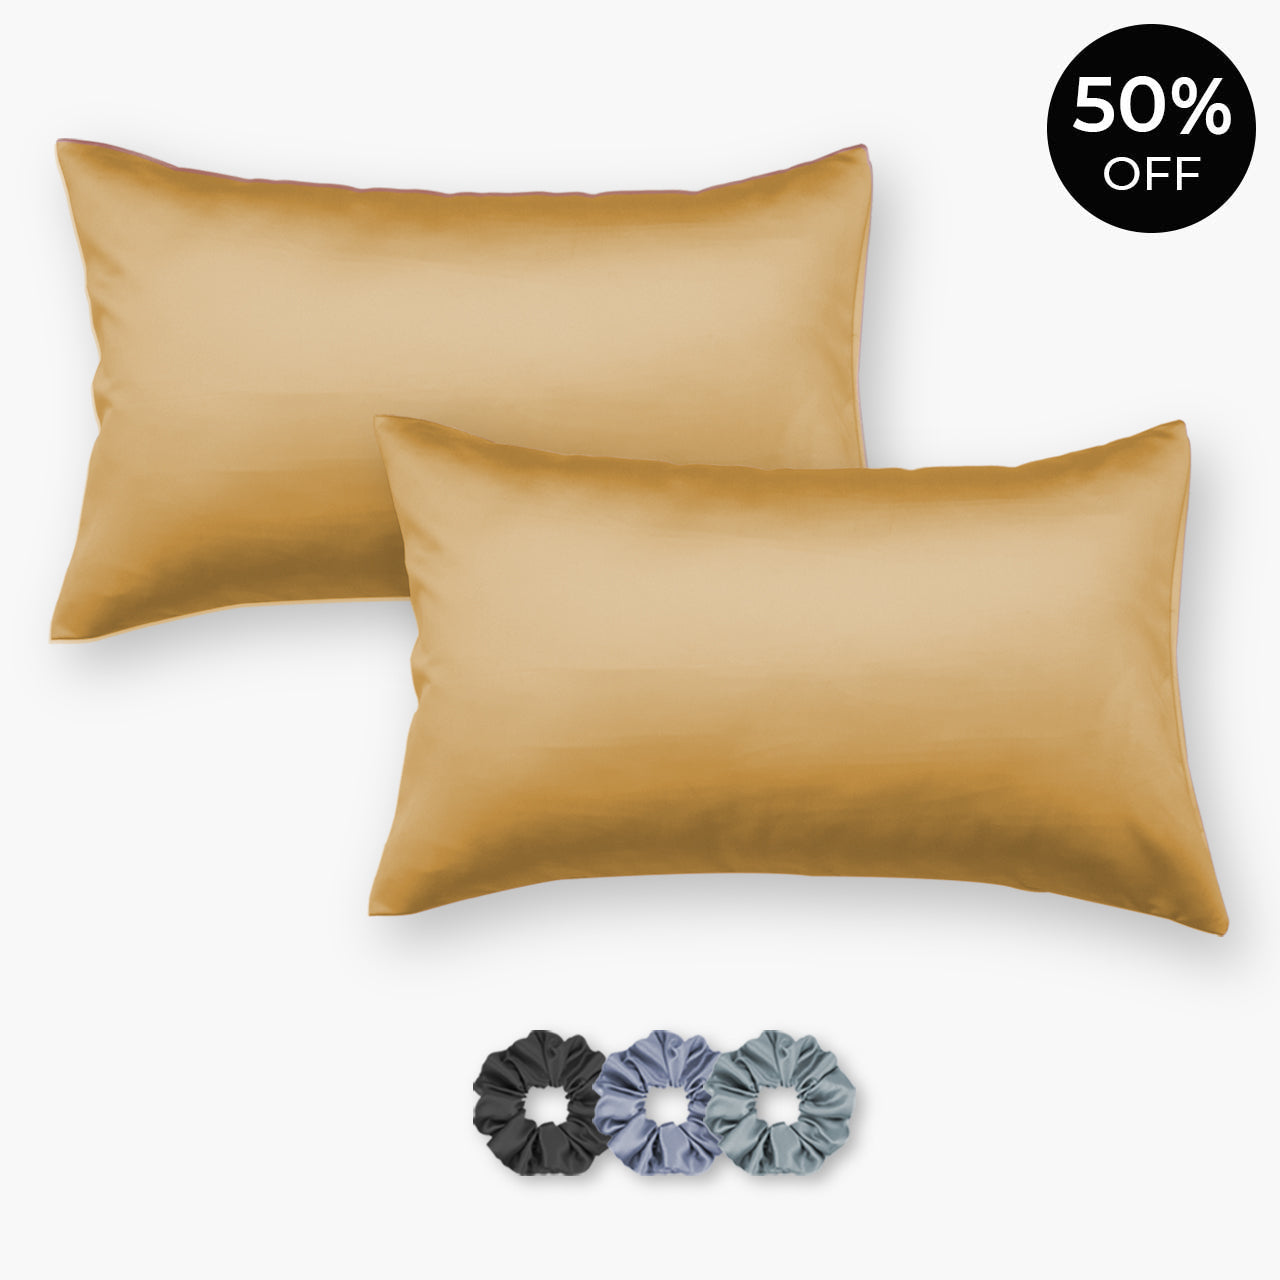 Gold Satin Pillowcases - Set of 2 (With 3 free scrunchies)